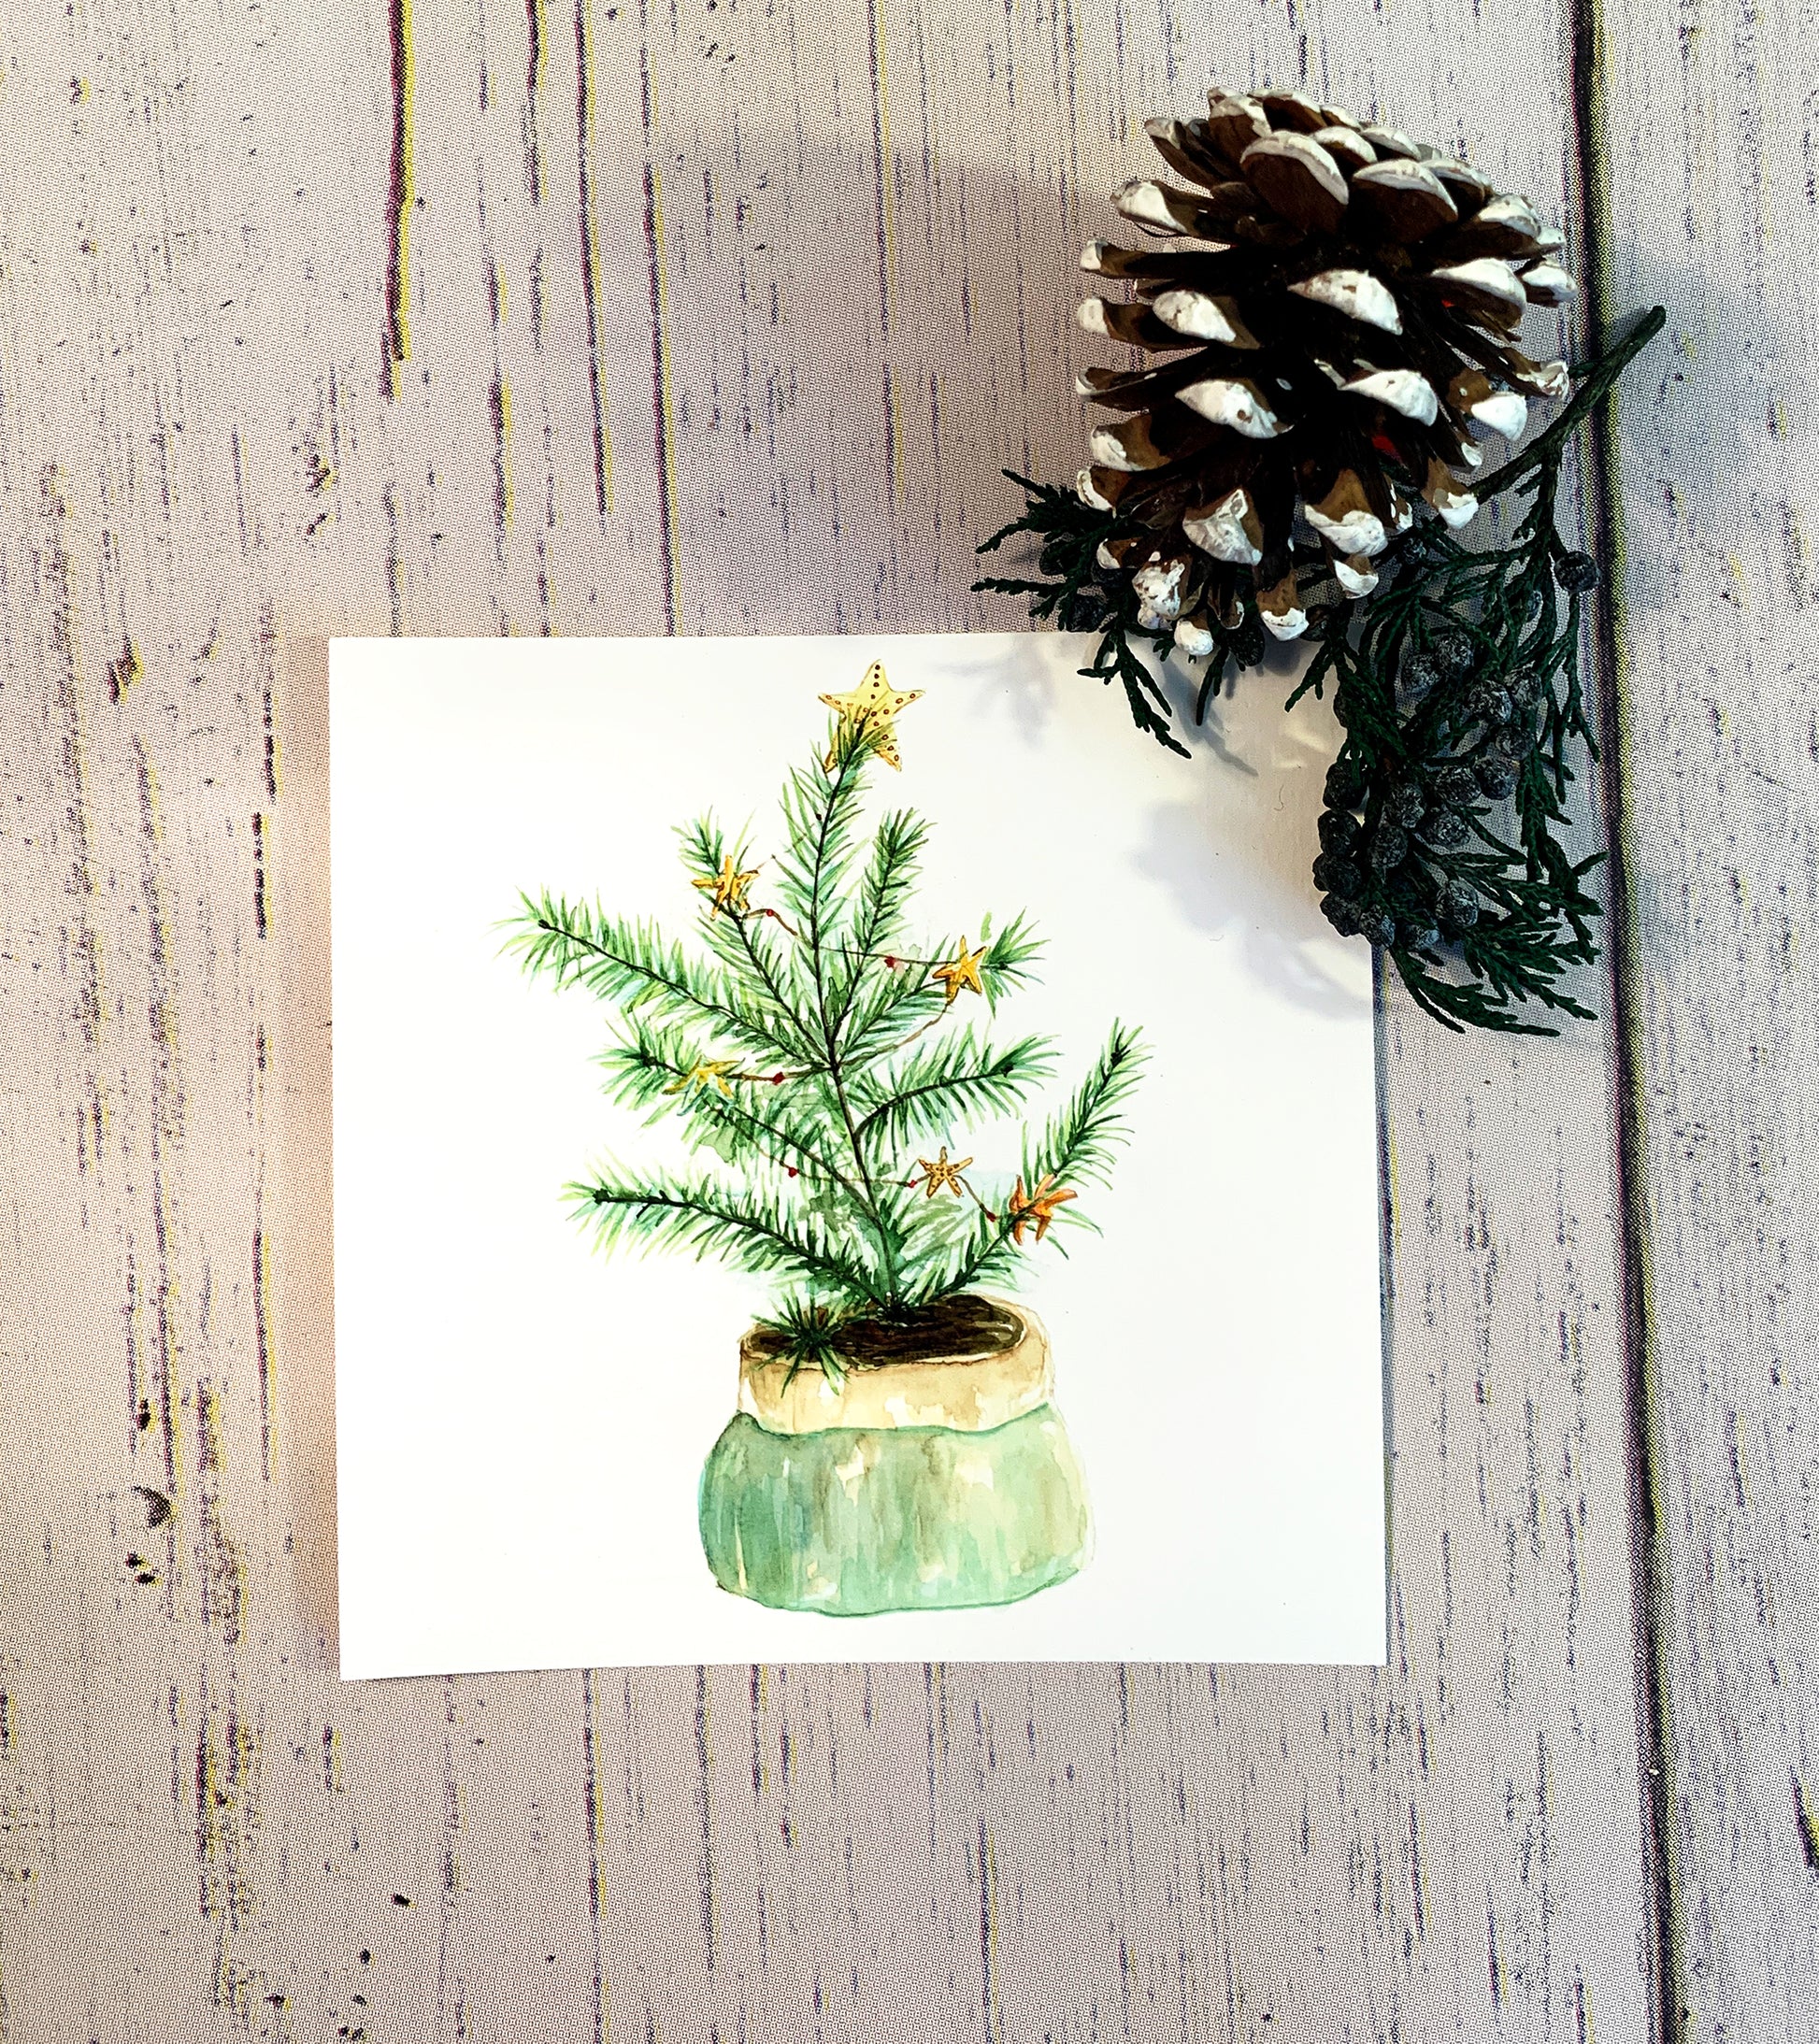 CHRISTMAS - Christmas Tree with Starfish Garland on Wood Block 5x5 or 8x8. Original Watercolor Painting - Flamingo Shores - Original Art for Home Decor and Gifts